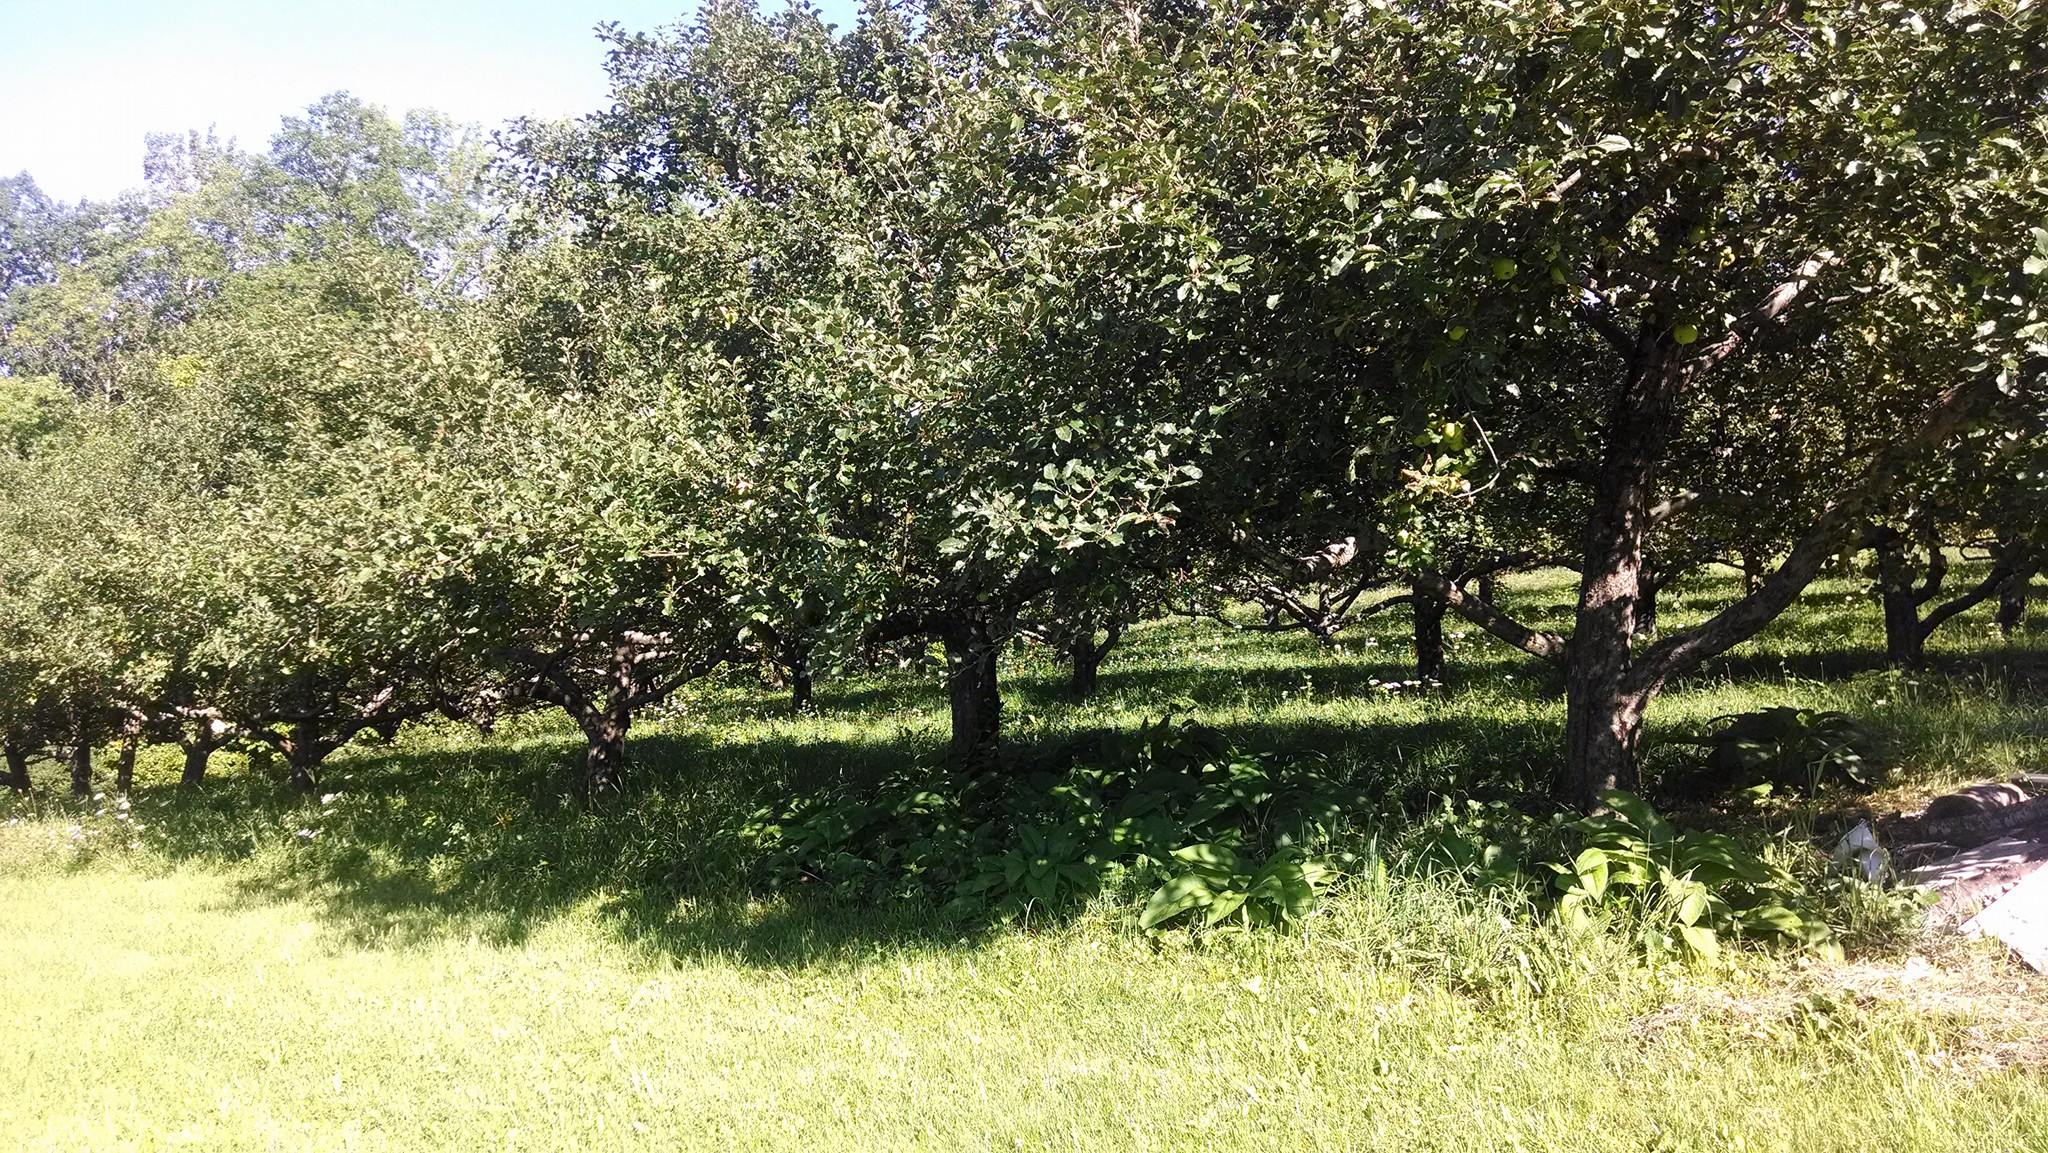 Apple trees in log grass, surrounded by comfrey